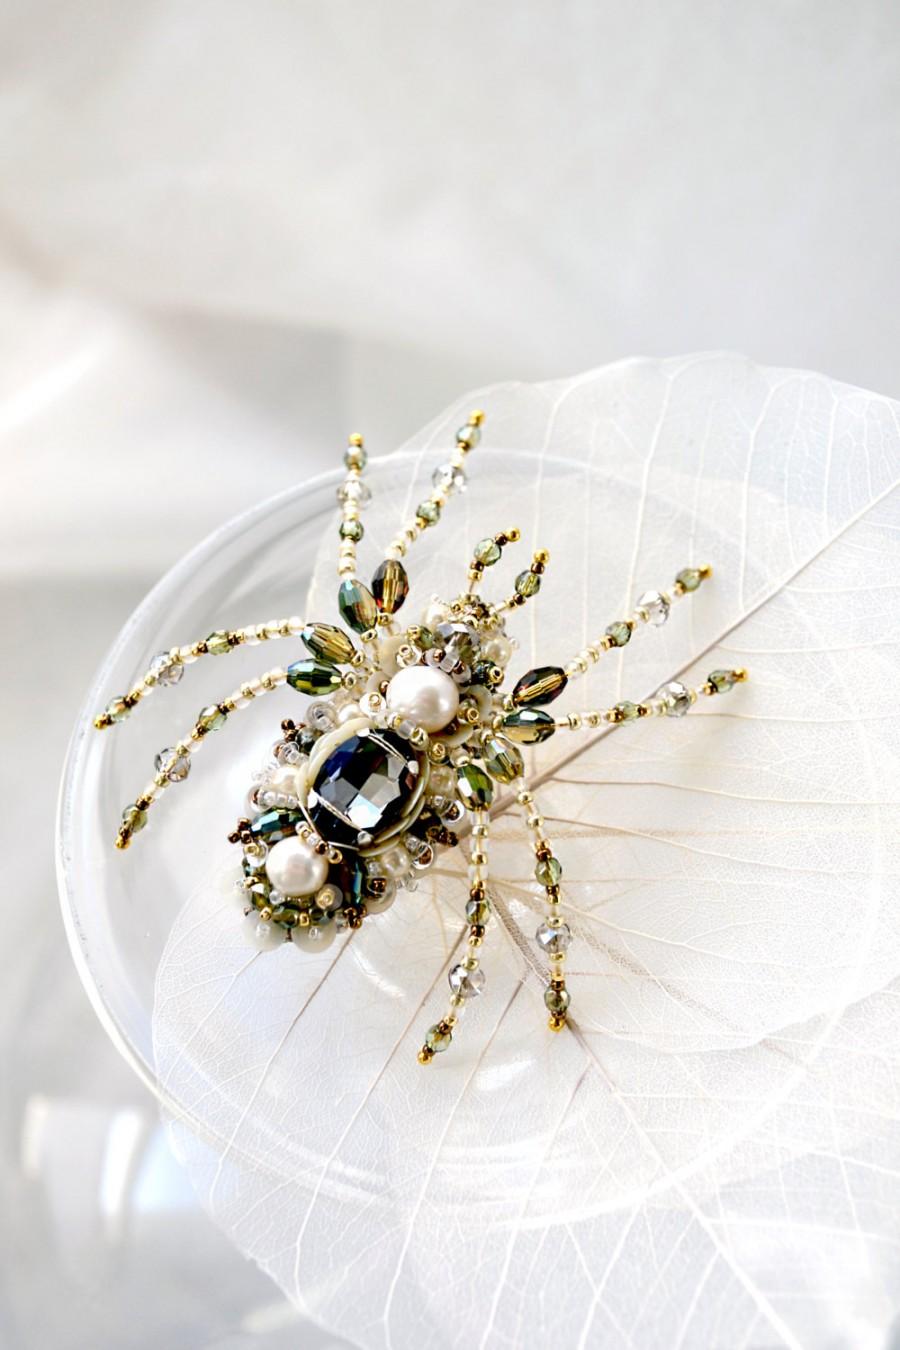 Mariage - Spider jewelry Unique Statement jewelry Spider brooch beadwork Designer jewelry Luxury gift for wife Mothers day gift Birthday gift for her